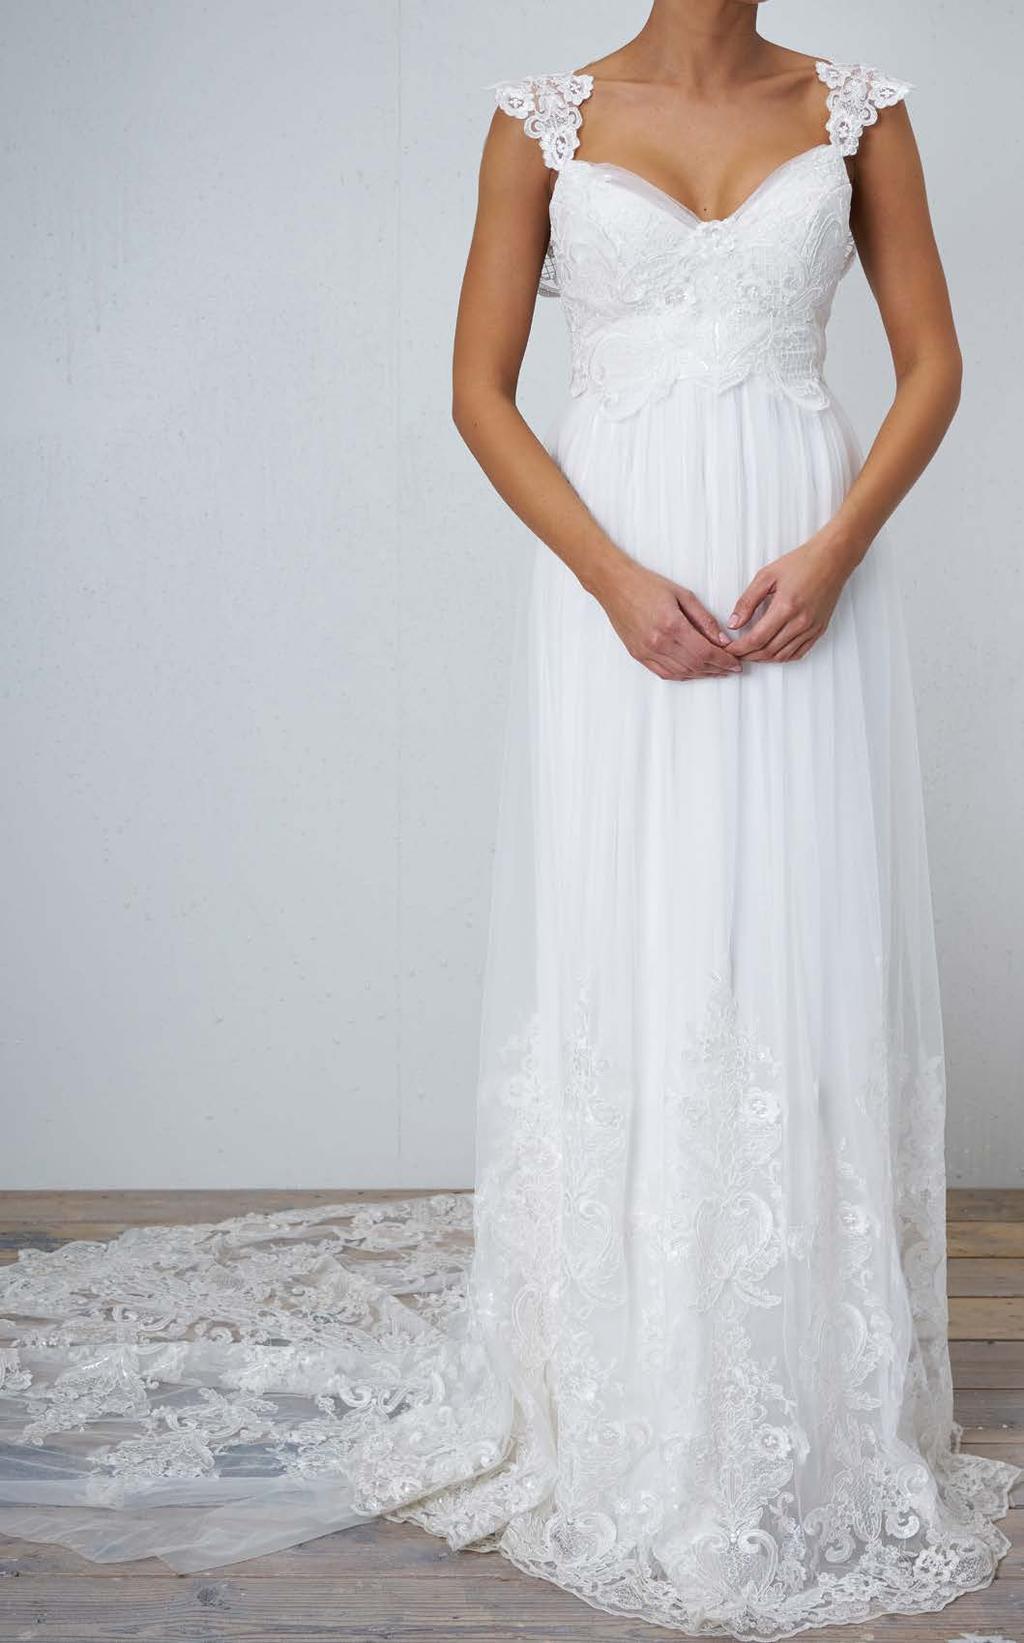 Gypsy Flowing and romantic, the Gypsy Skirt creates the kind of wedding dress you want to